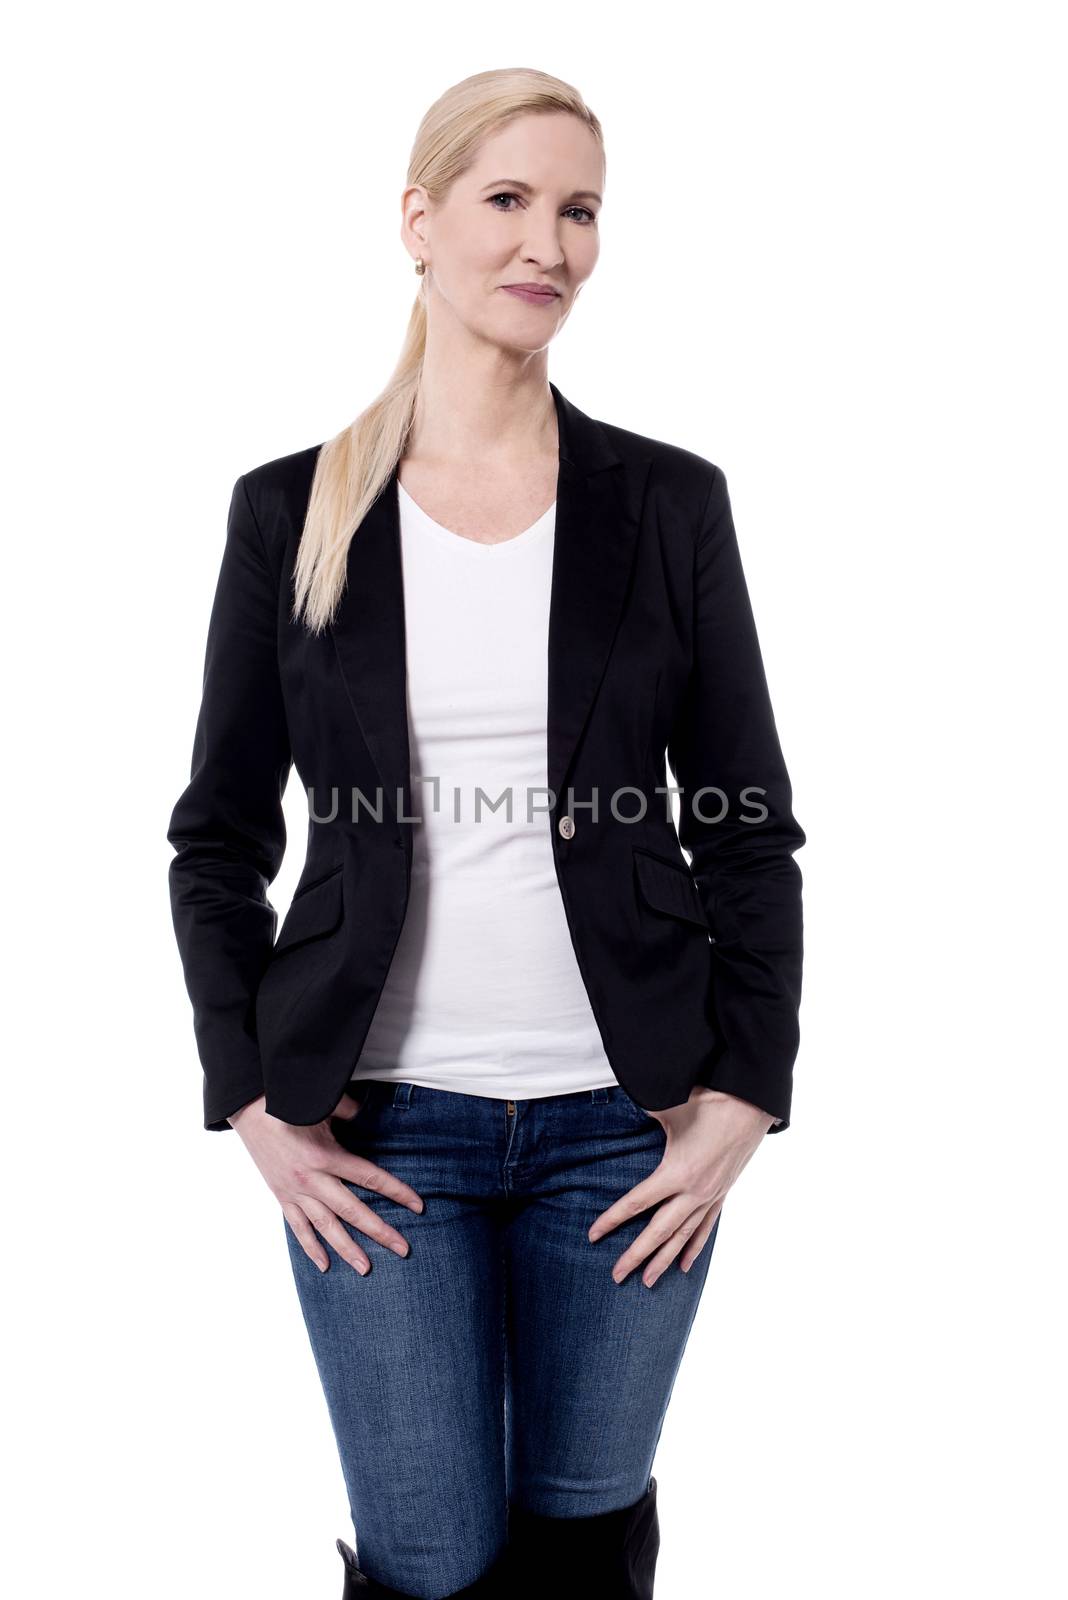 Stylish woman posing with hands in her pockets